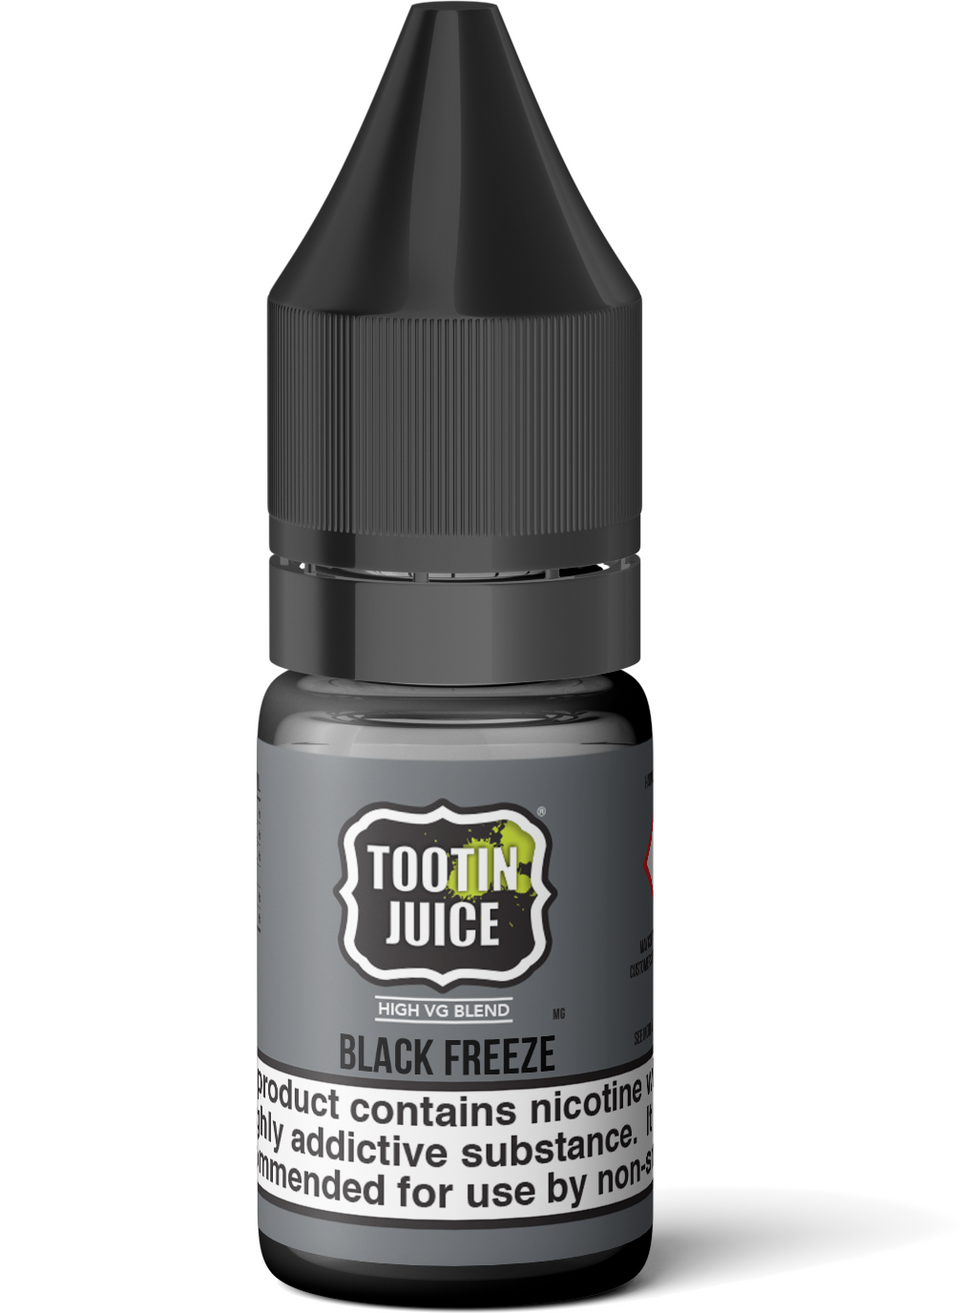 High VG Black Freeze (formerly known as Blackcurrant Frost) - ASPIRE UK